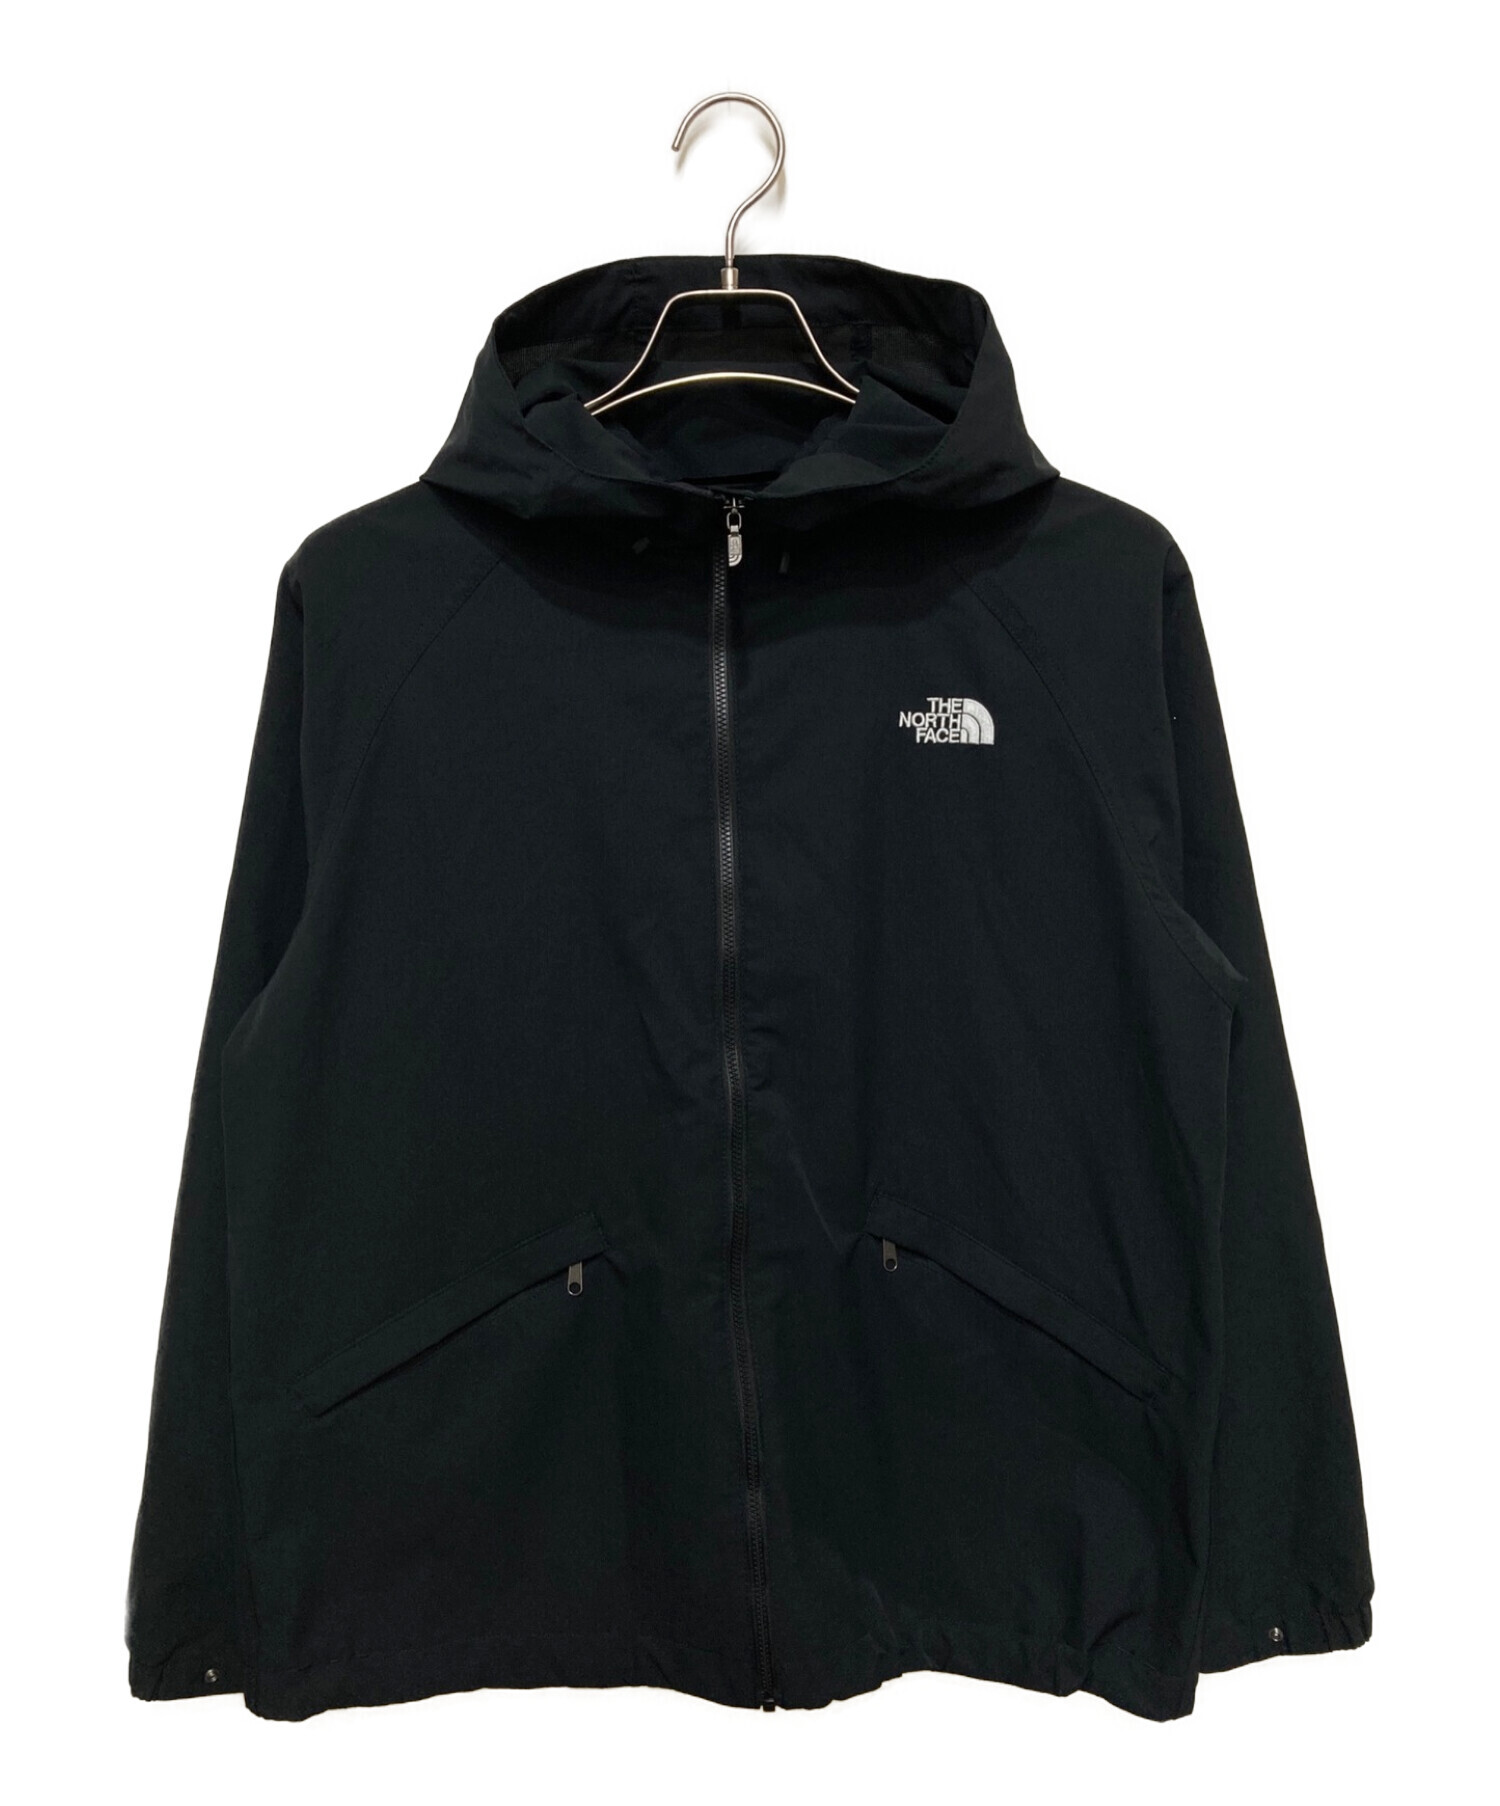 THE NORTH FACE★ FREE JACKET ブラックM